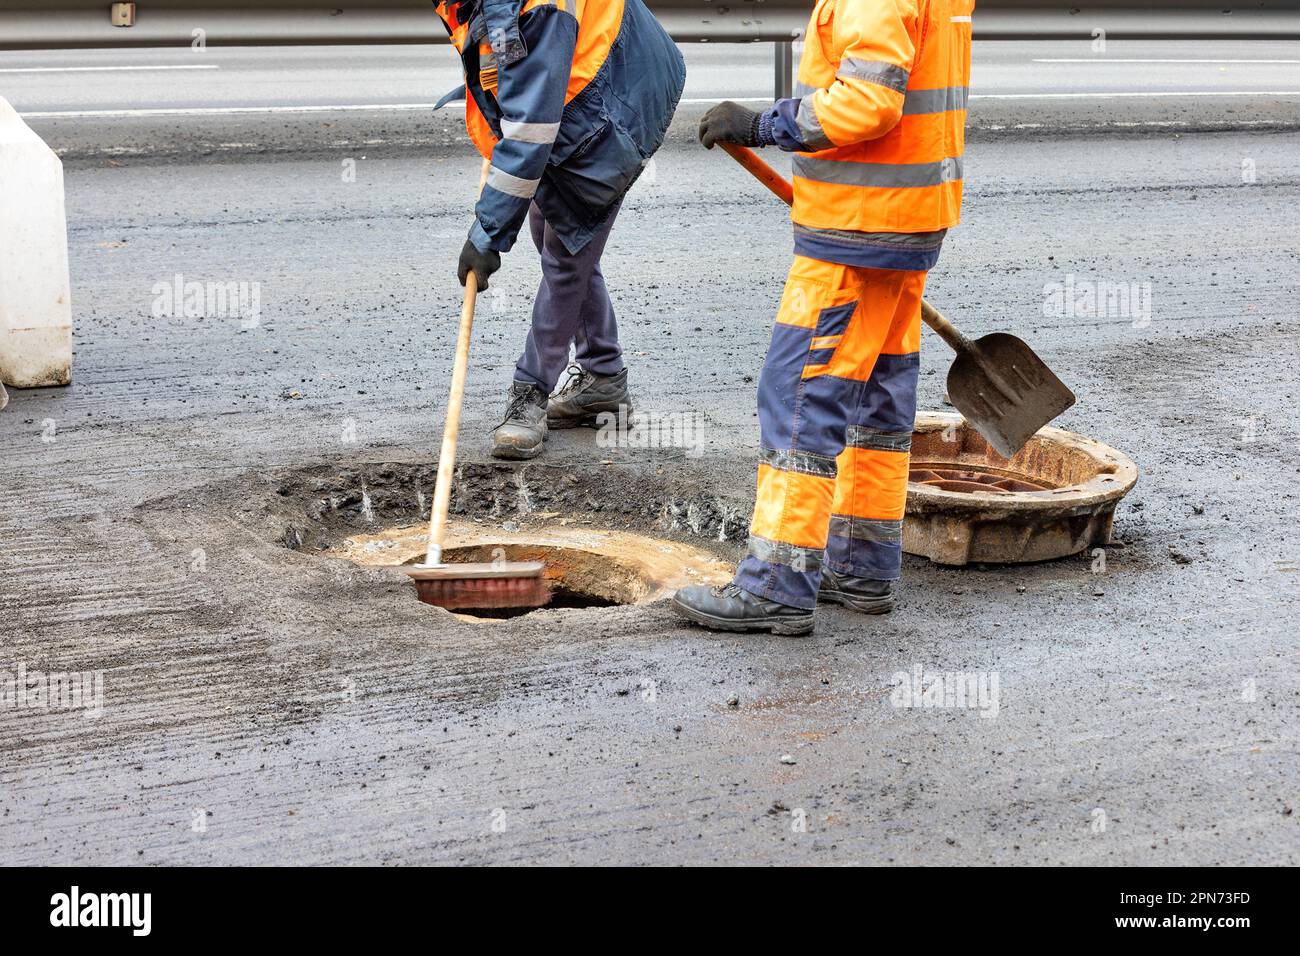 A team of road workers in orange-and-blue overalls with a shovel and brush clear a site for a new sewer manhole on the roadway. Copy space. Stock Photo